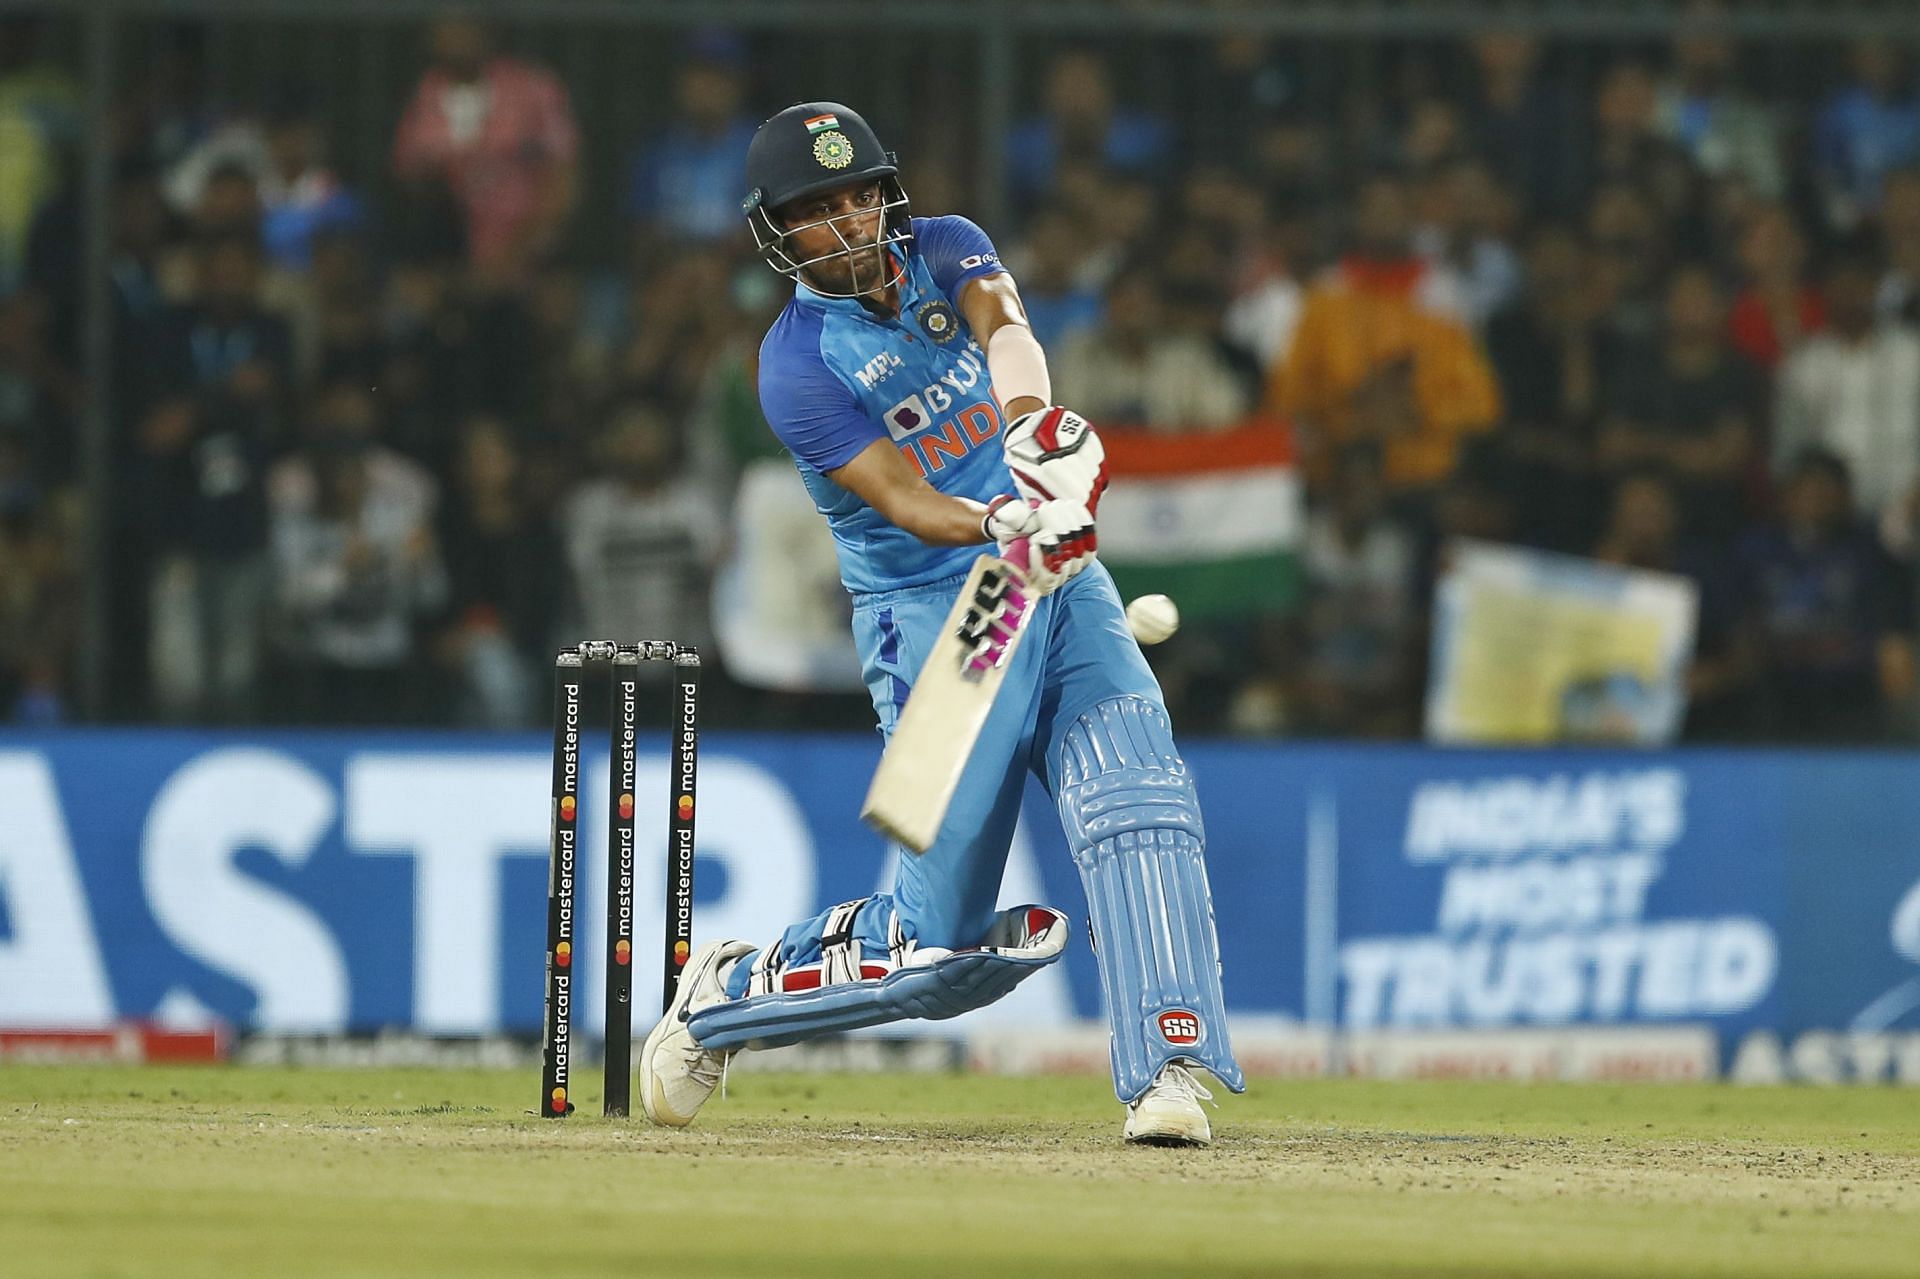 3rd T20 International: India v South Africa